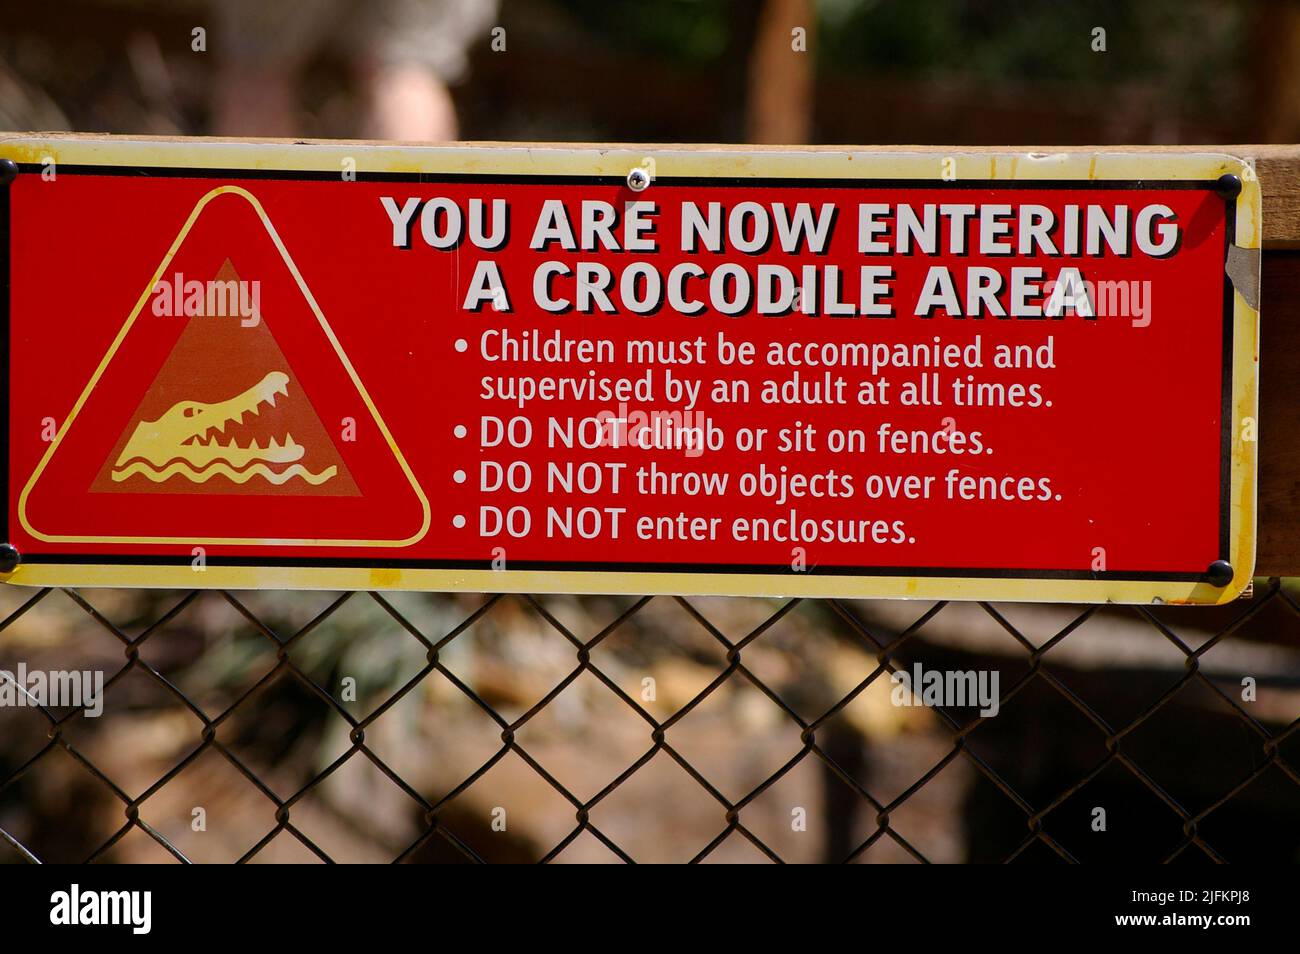 Red warning sign on fence in wildlife park telling people to keep away from crocodiles and not to enter their enclosure. Queensland, Australia. Stock Photo